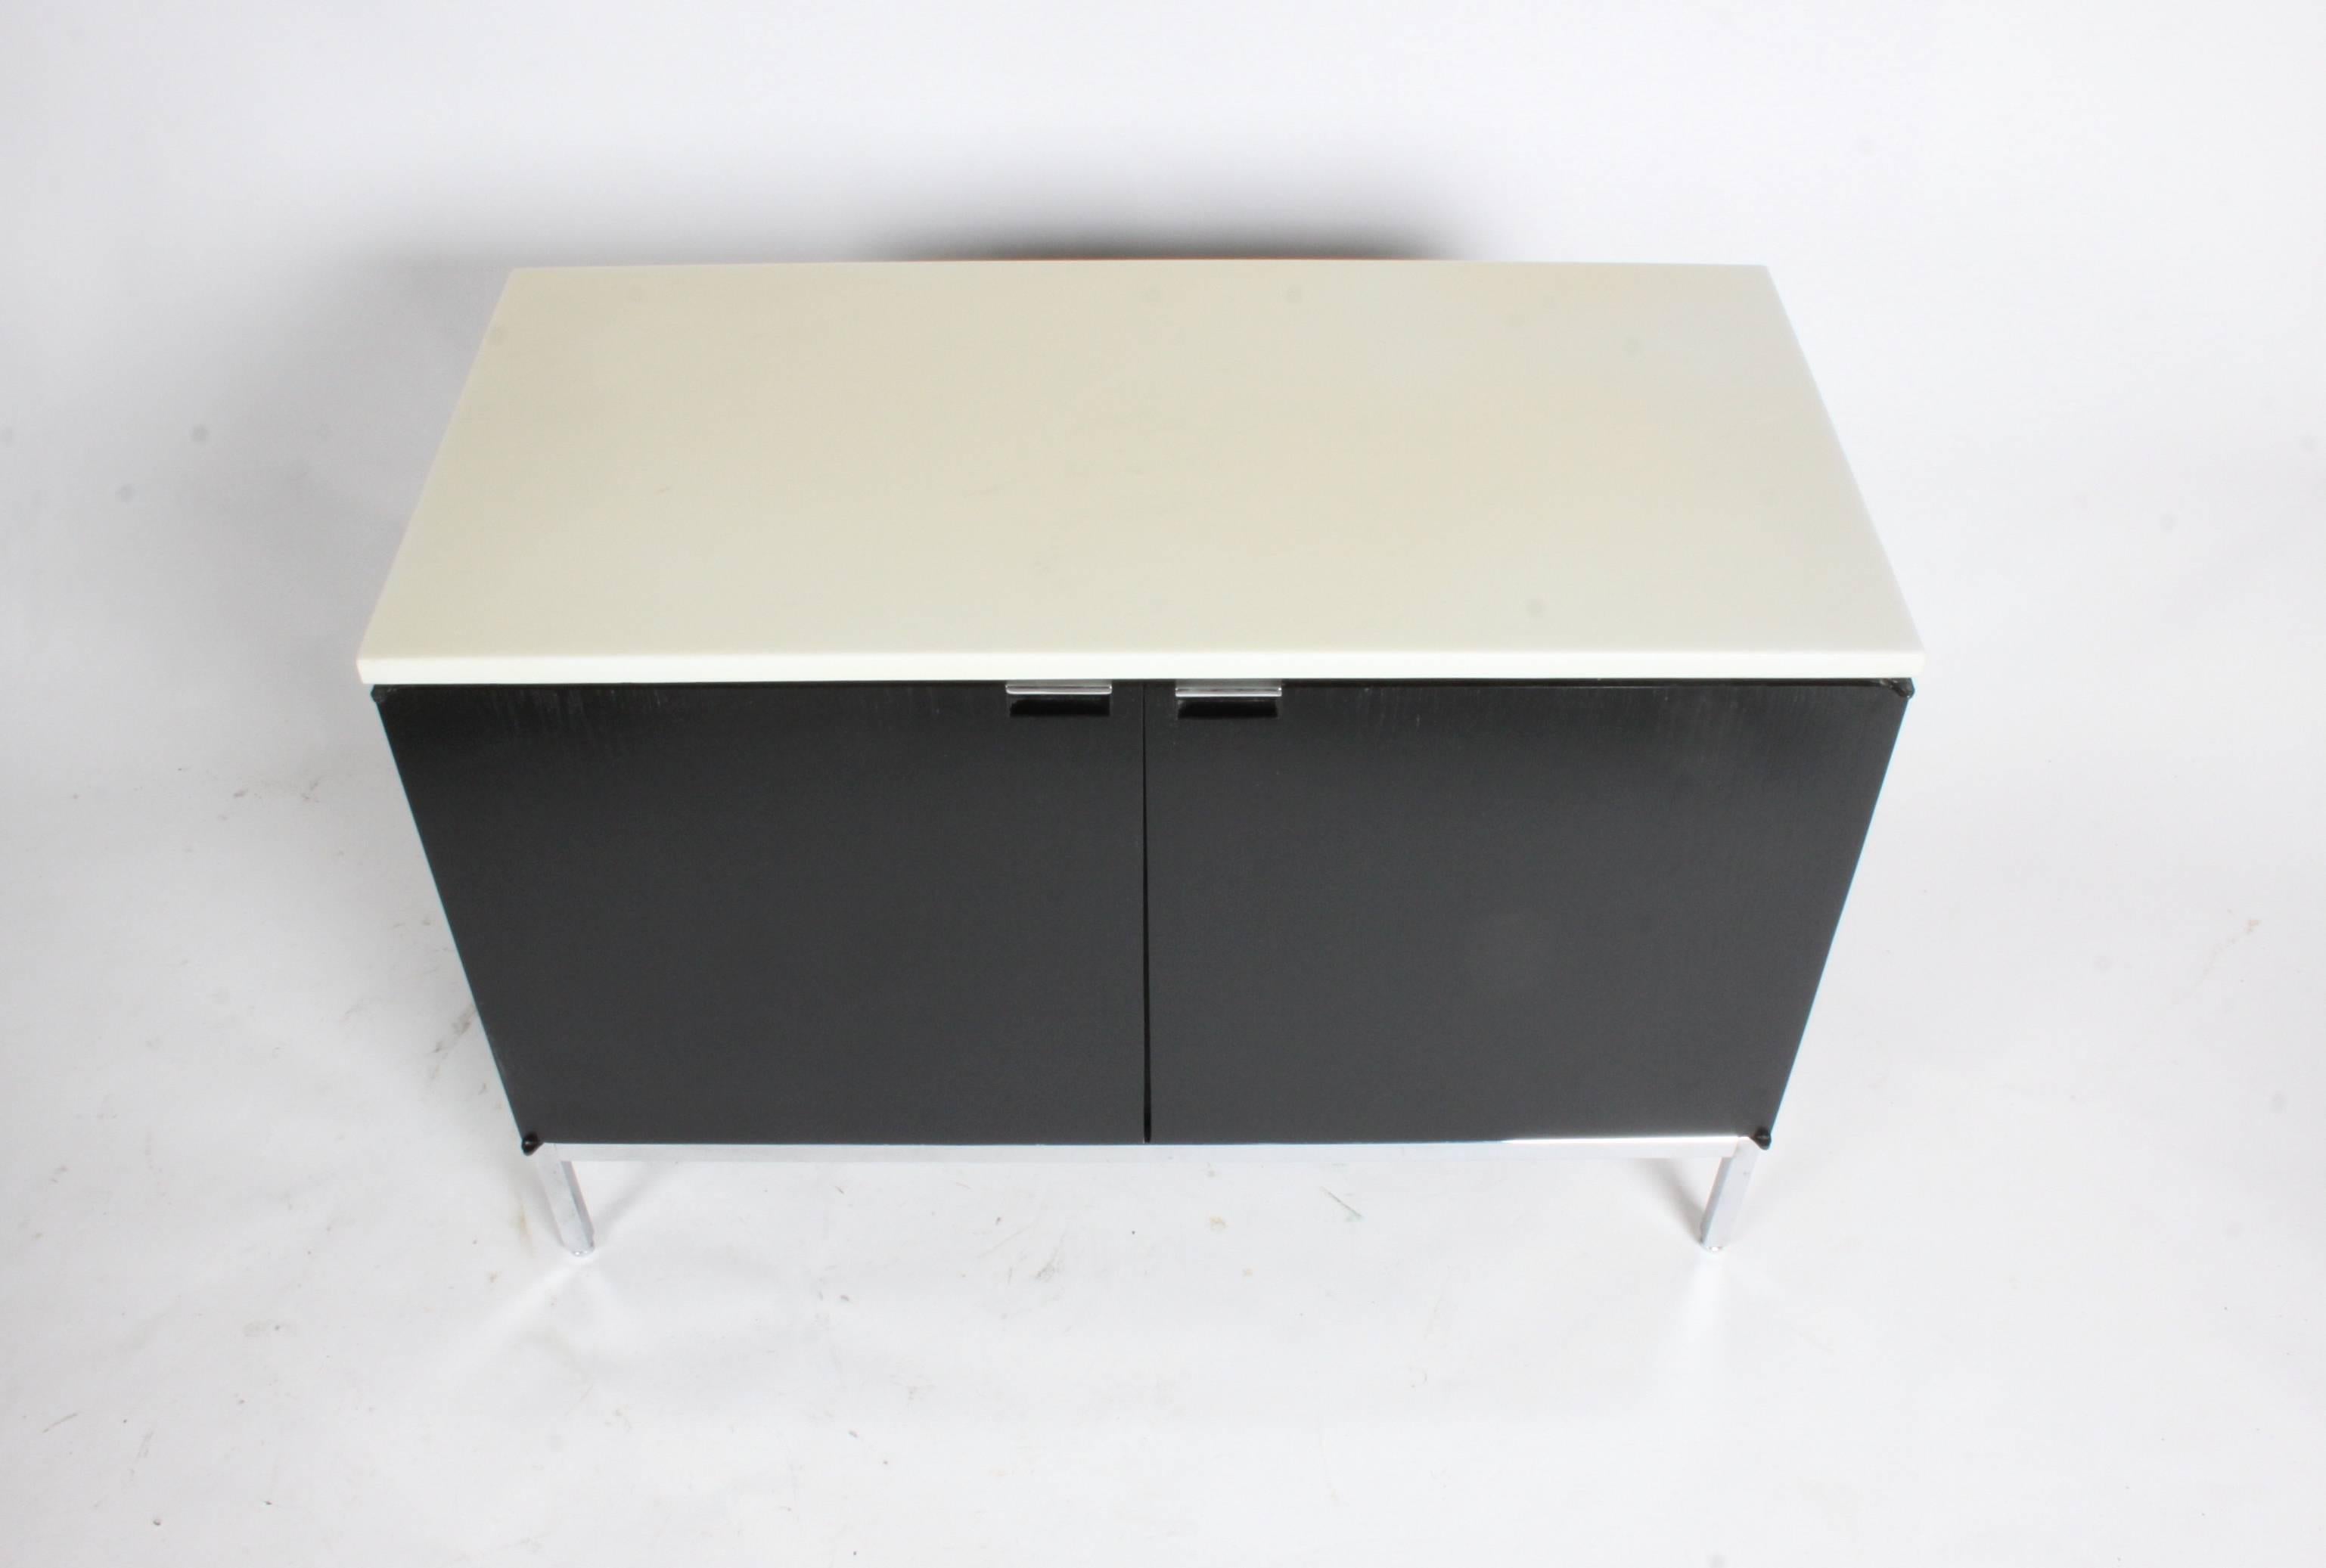 Single Florence Knoll credenza with clear lacquered marble top and ebony stain. Inside width 17 1/2 W x 17 H with adjustable shelves. Very nice example.